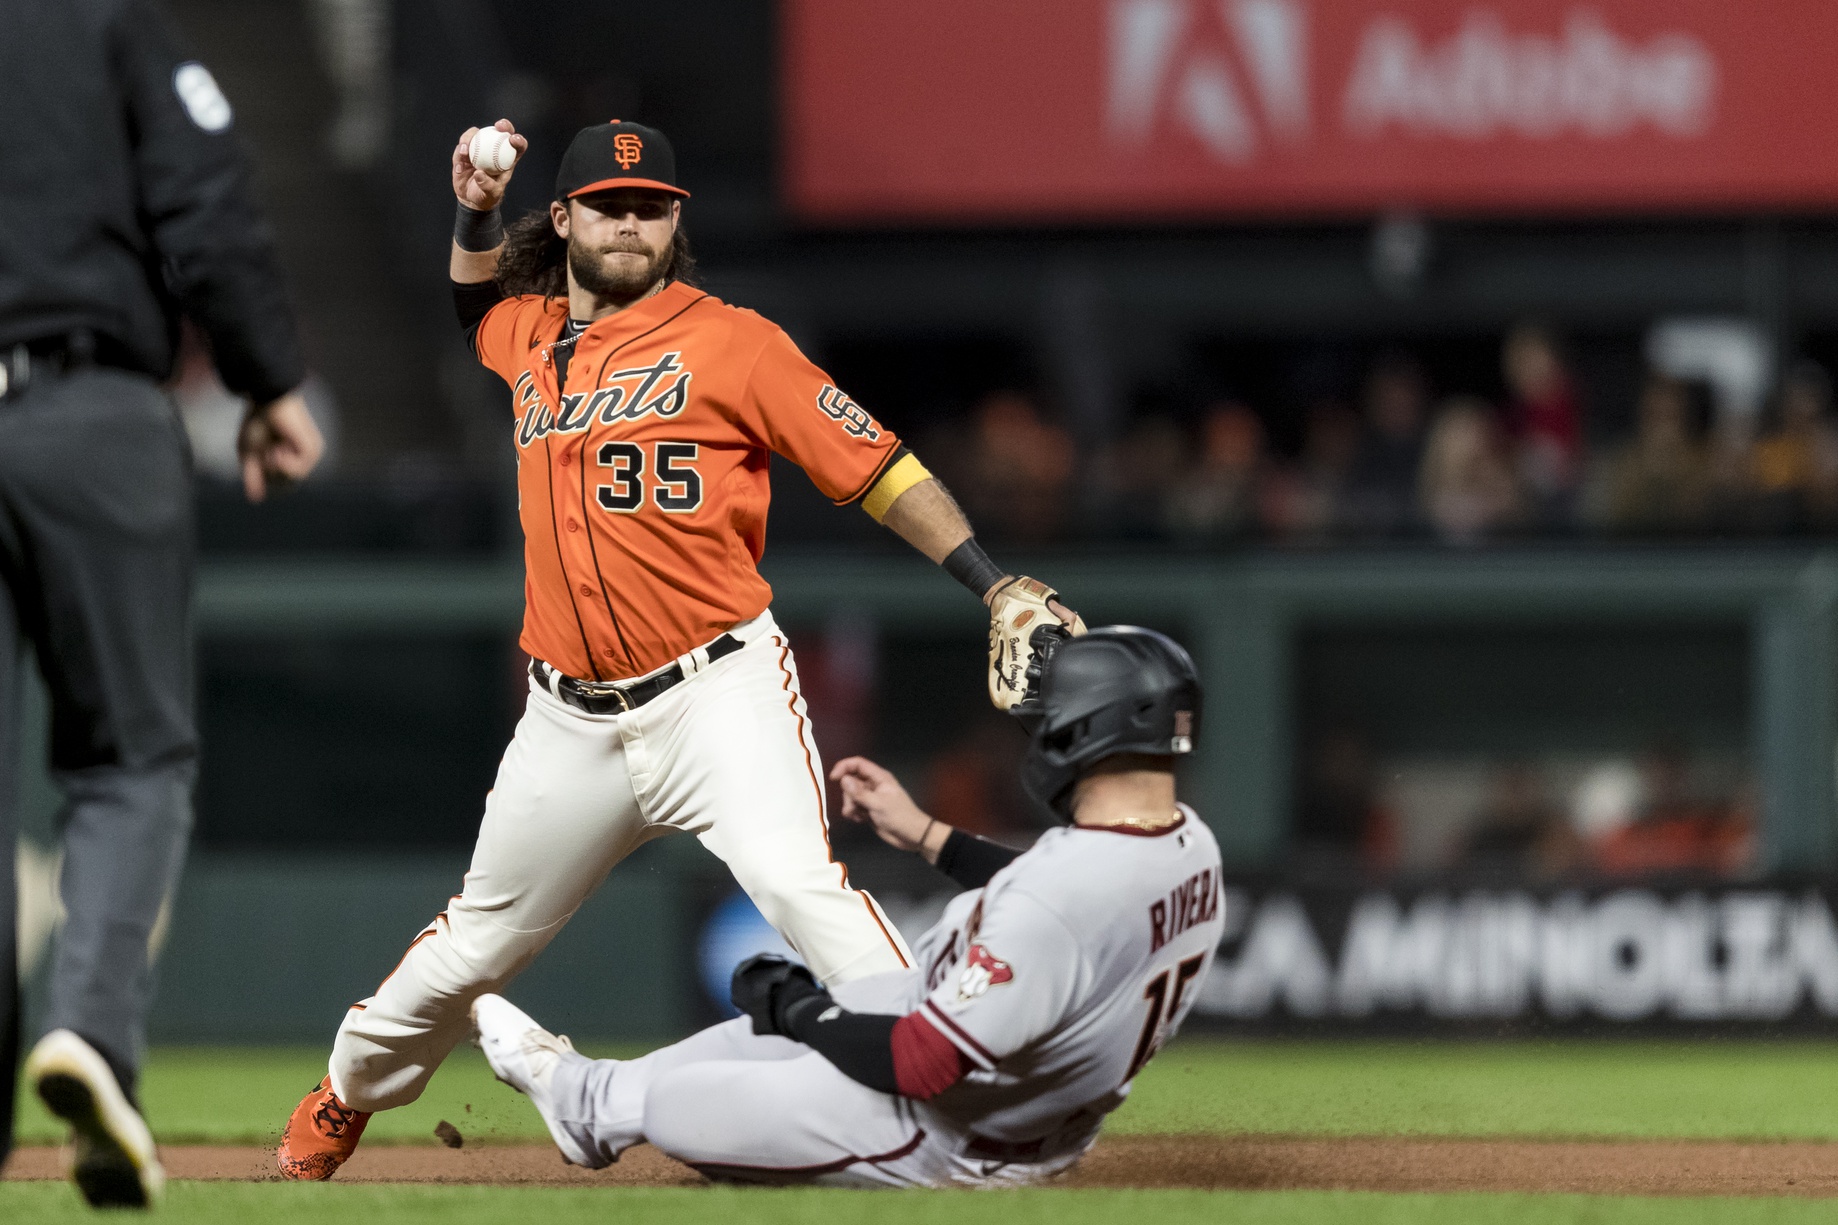 Giants shortstop Brandon Crawford: Five things you don't know